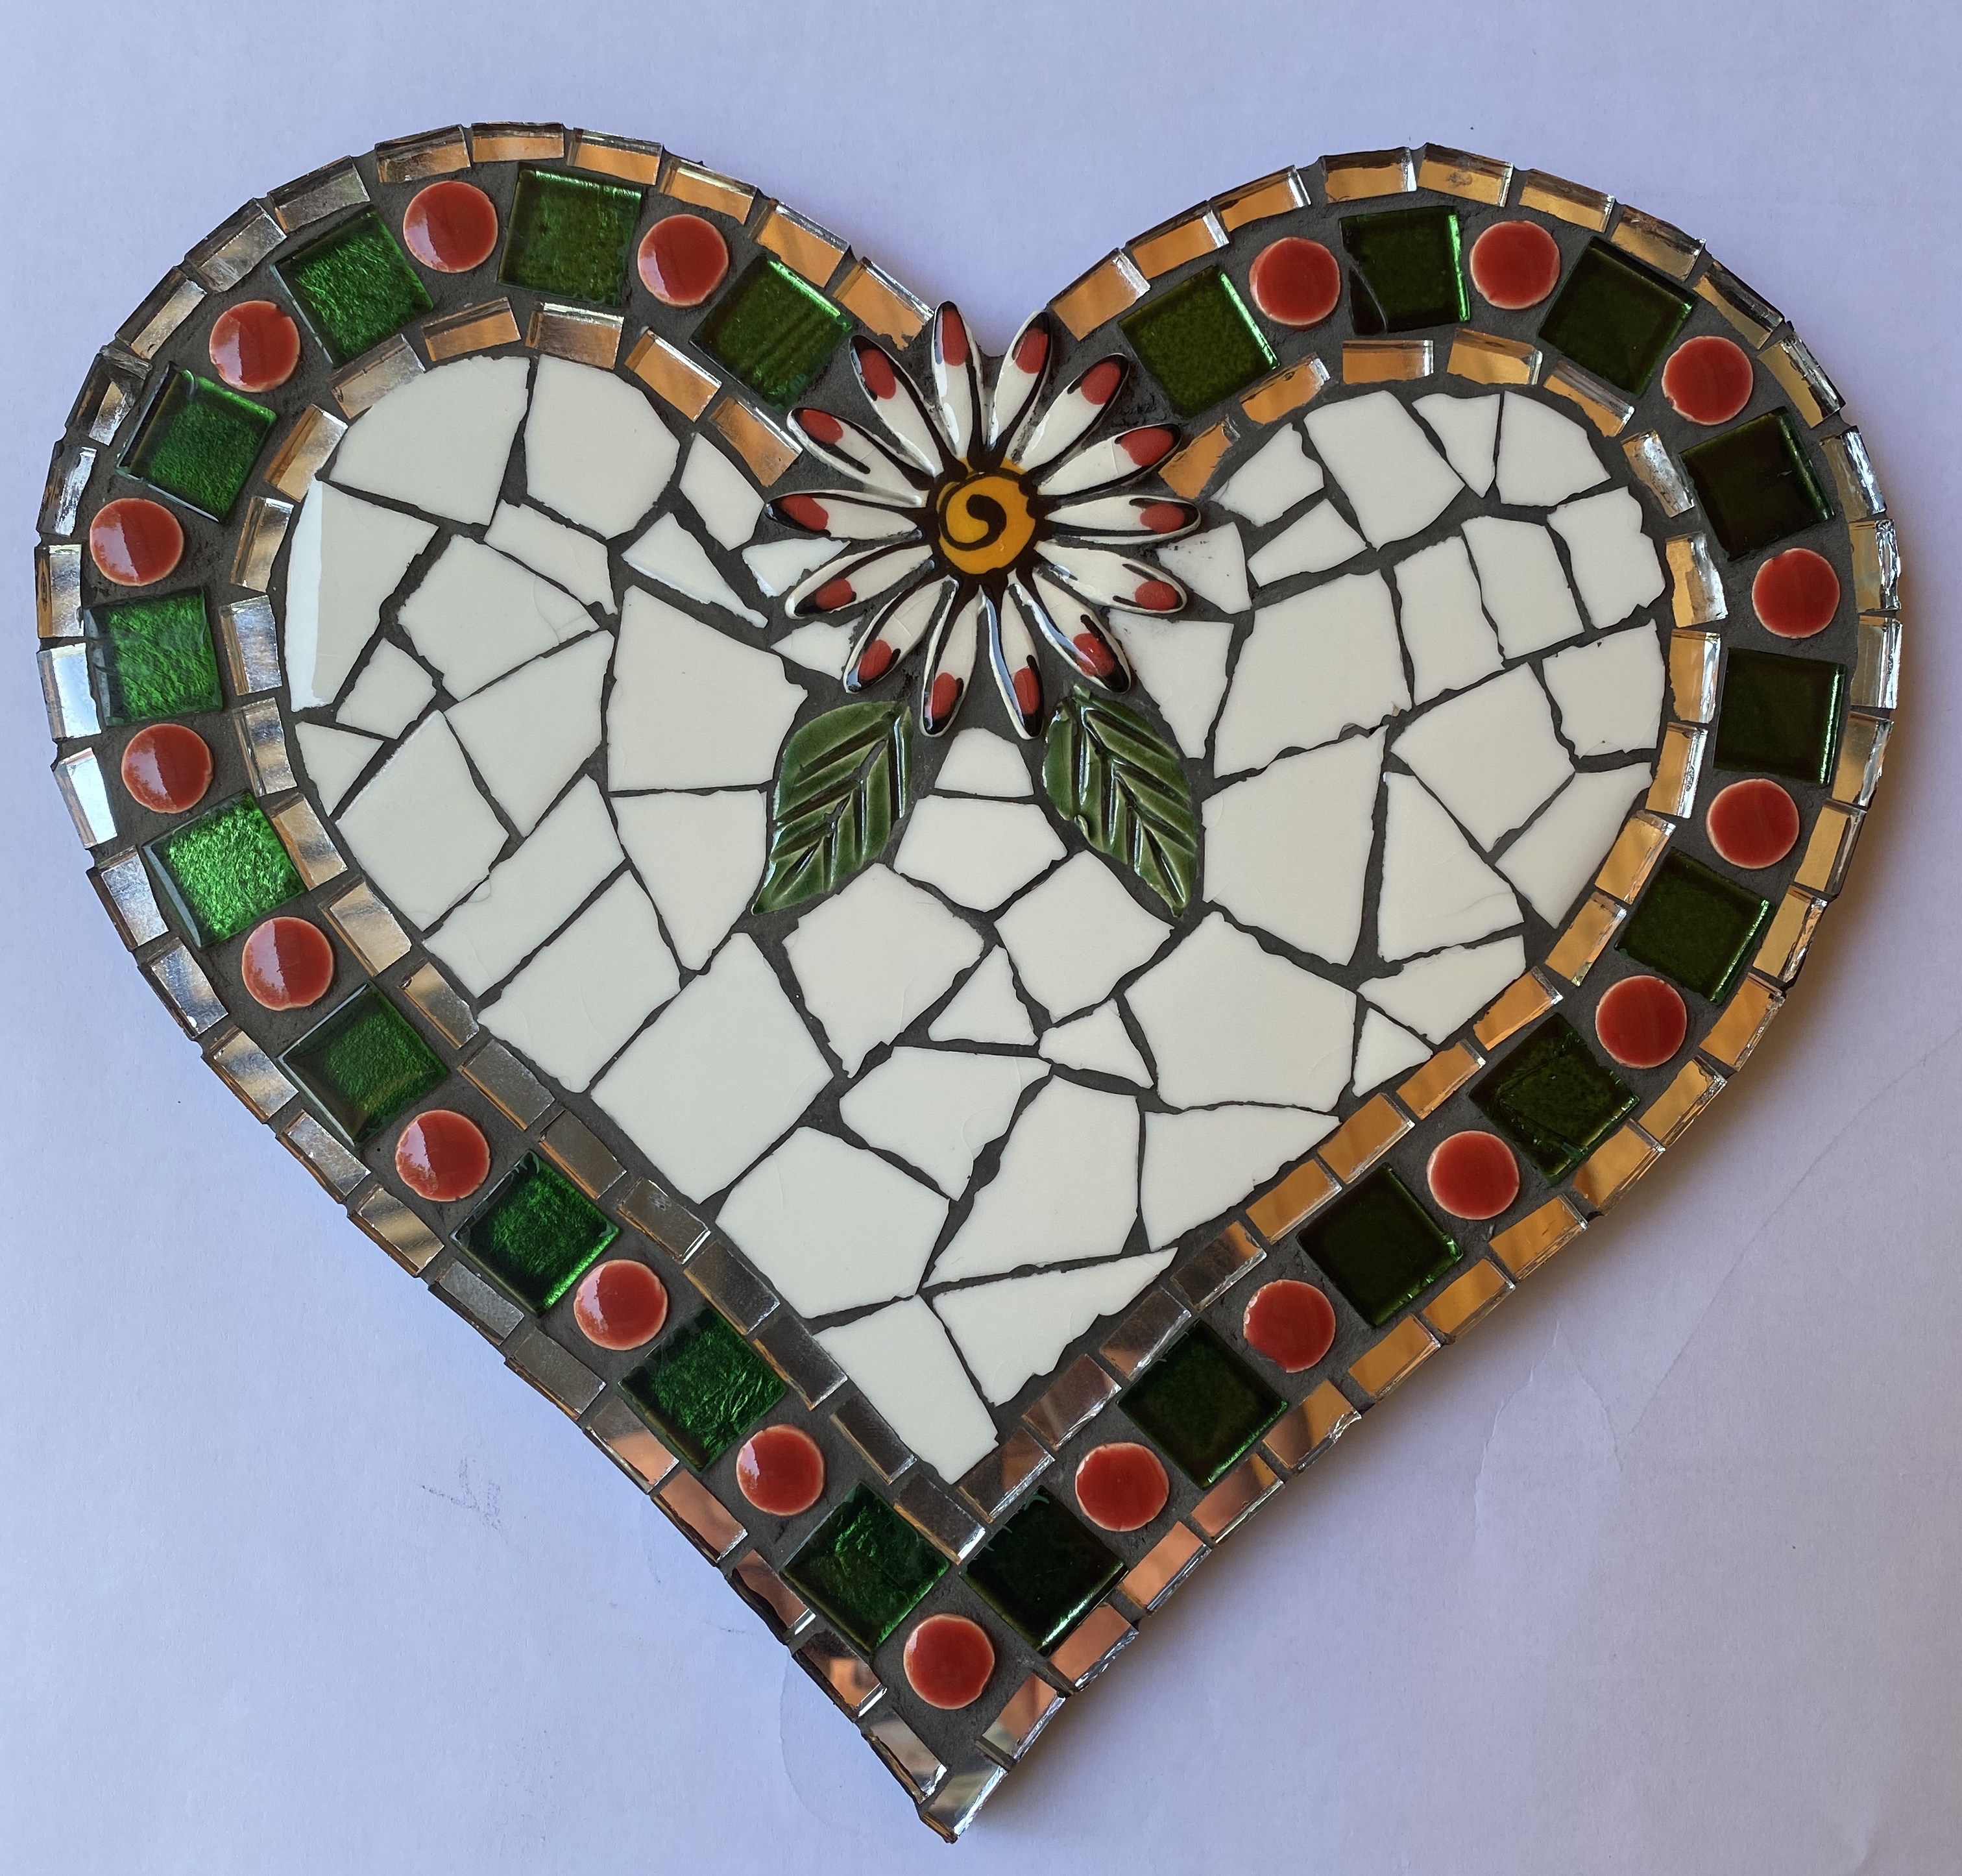 heart-kit-with-flower-and-green-tiles